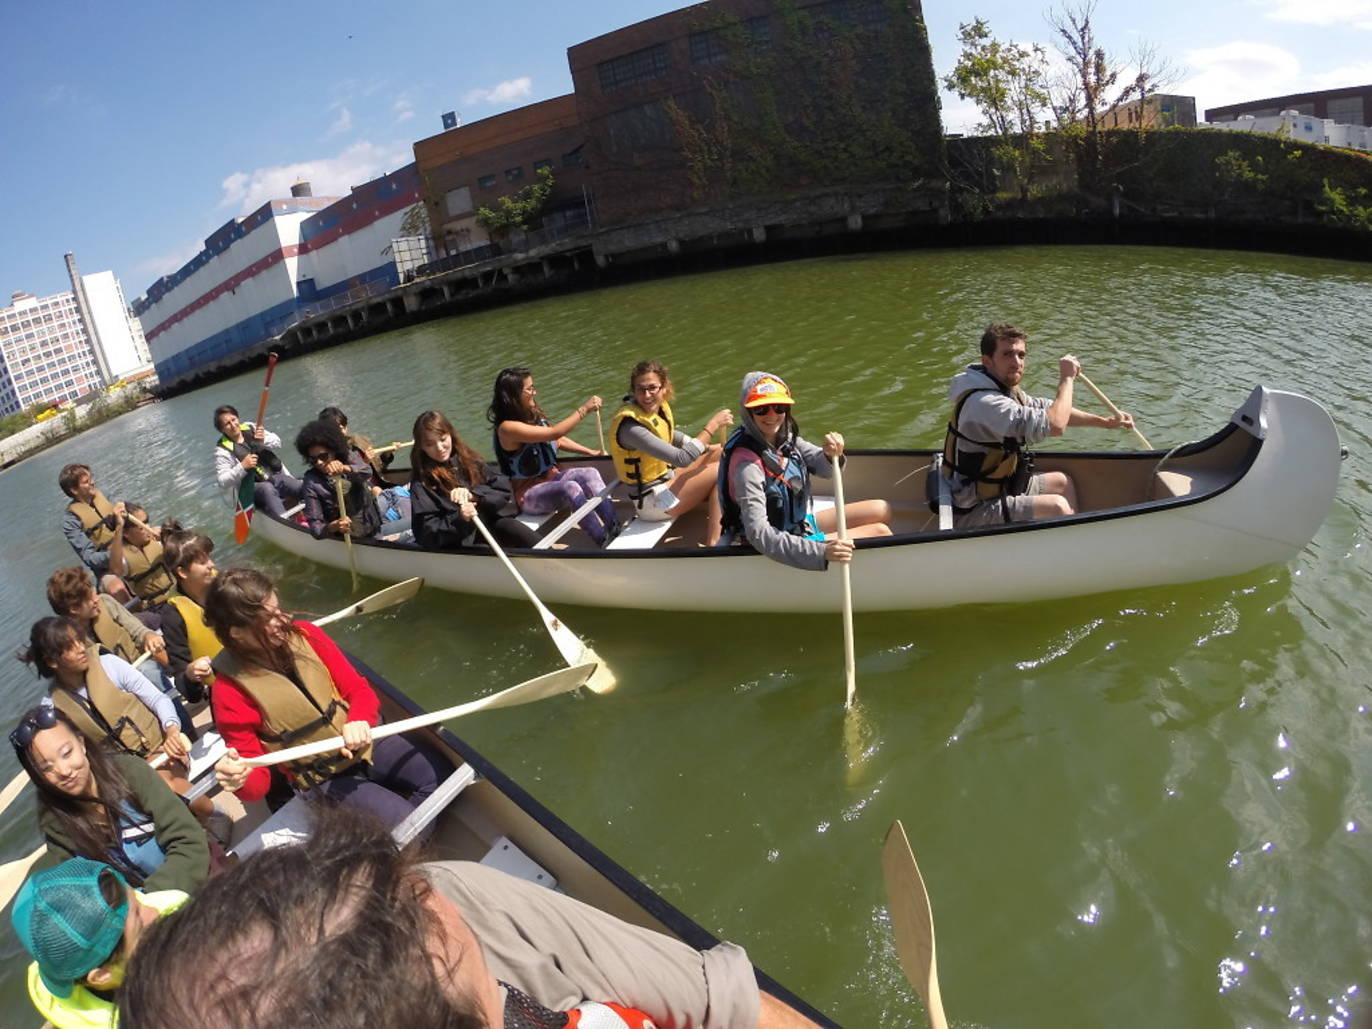 6 KidFriendly Options for Free Kayaking in NYC